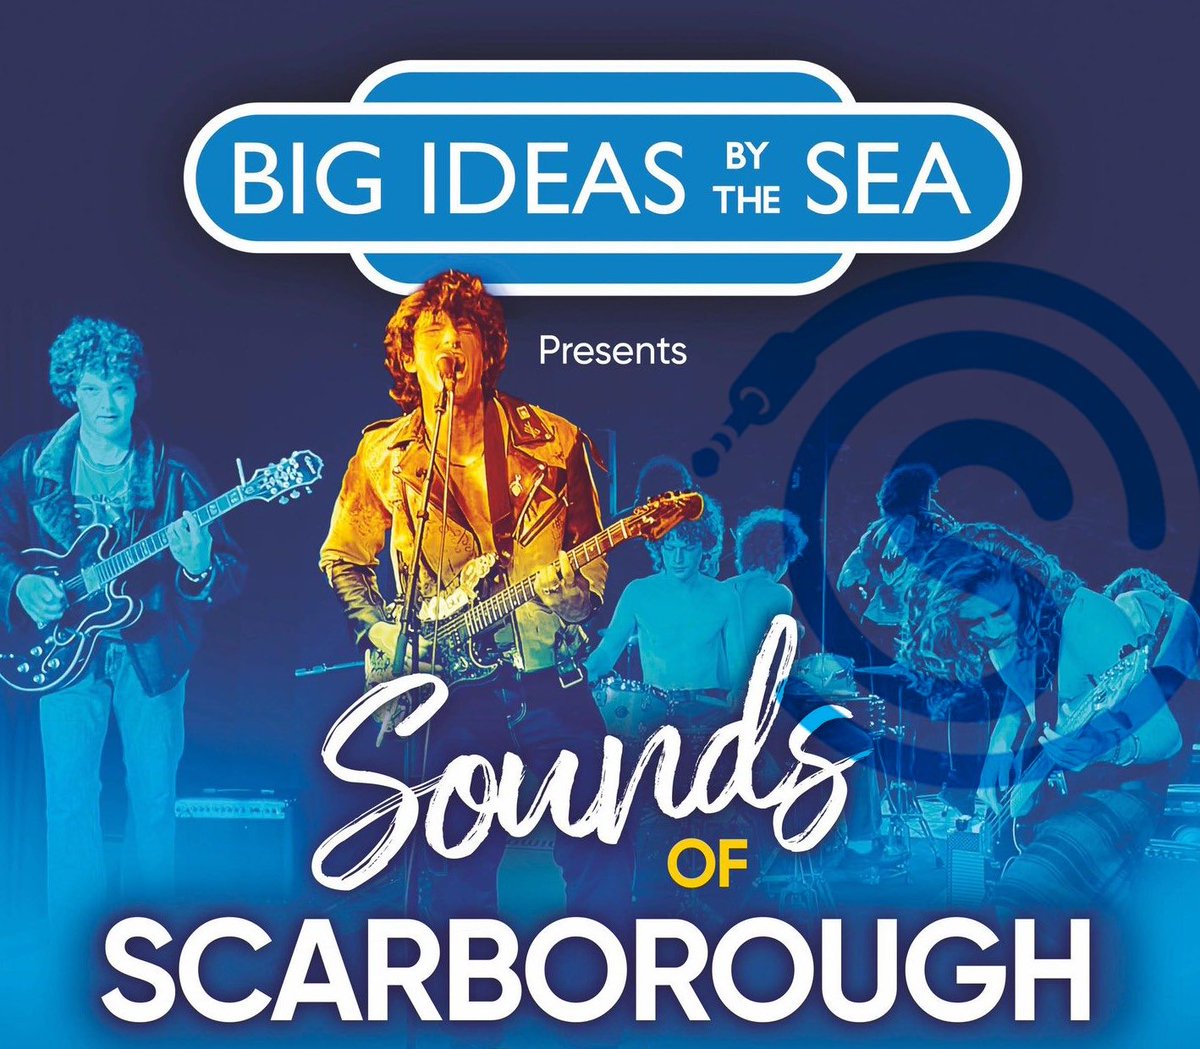 The Sound of Scarborough presents Big Ideas by the Sea! Taking place Saturday 18th May showcasing some of of Scarborough's young musical talent! More to be announced soon!